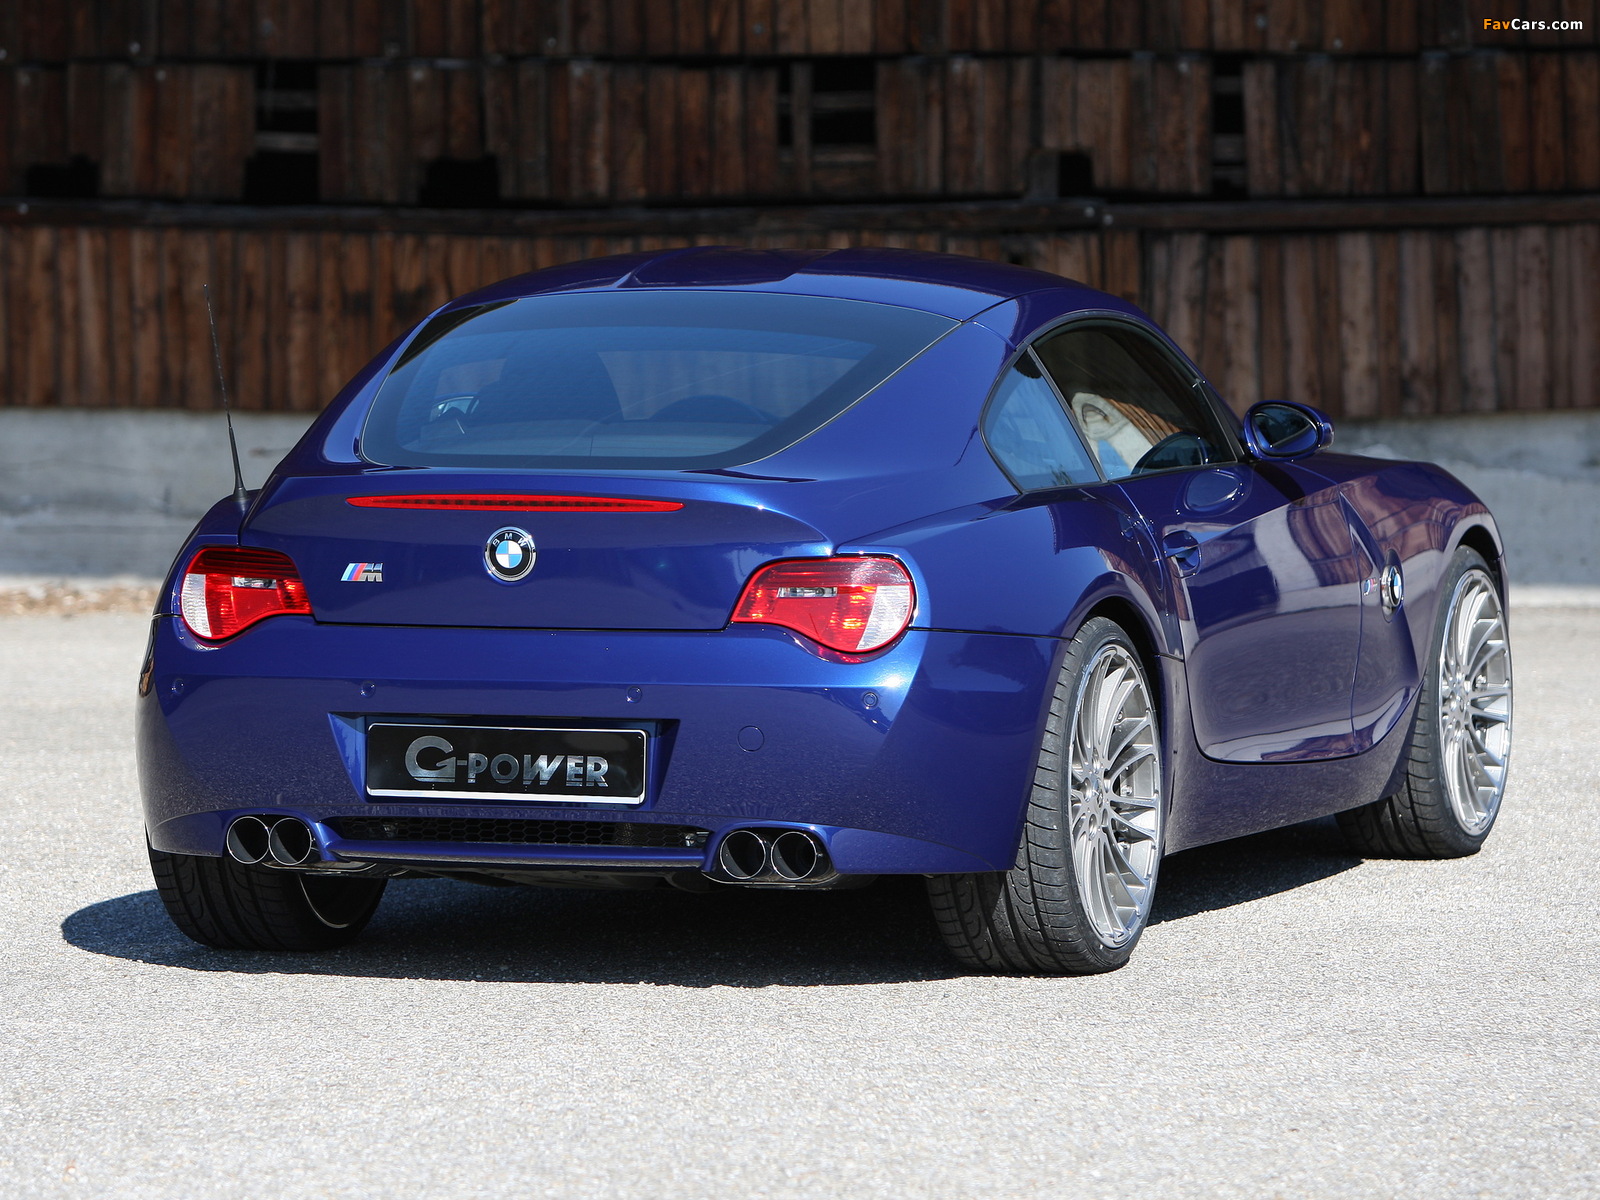 G-Power BMW Z4 M (E85) 2008 pictures (1600 x 1200)